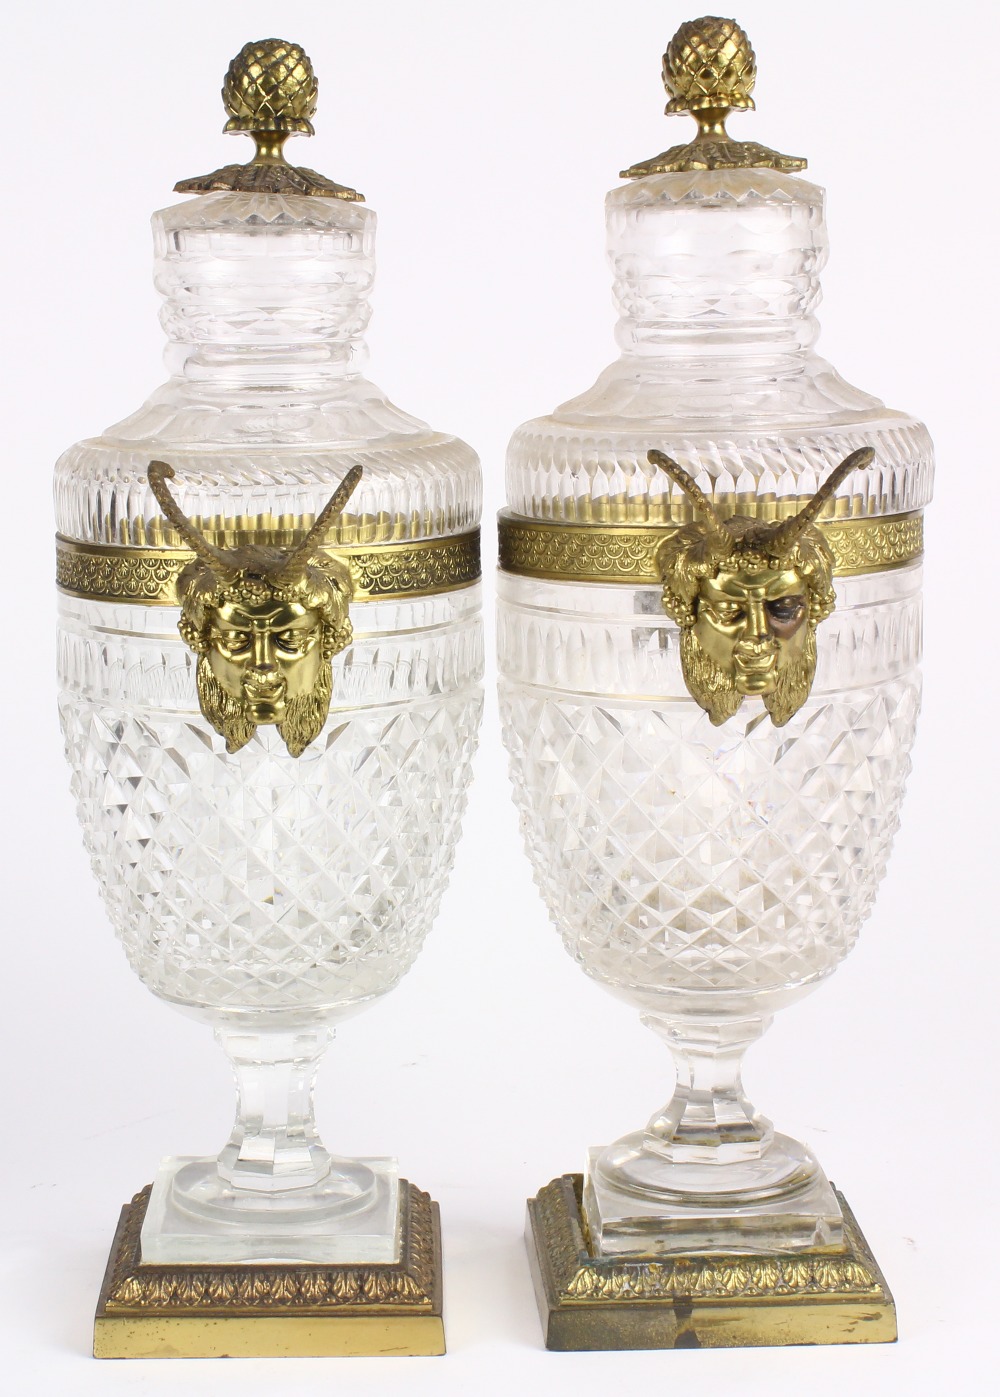 Pair of Neoclassical style cut glass and ormolu lidded urns, the baluster form flanked by mystical - Image 4 of 4